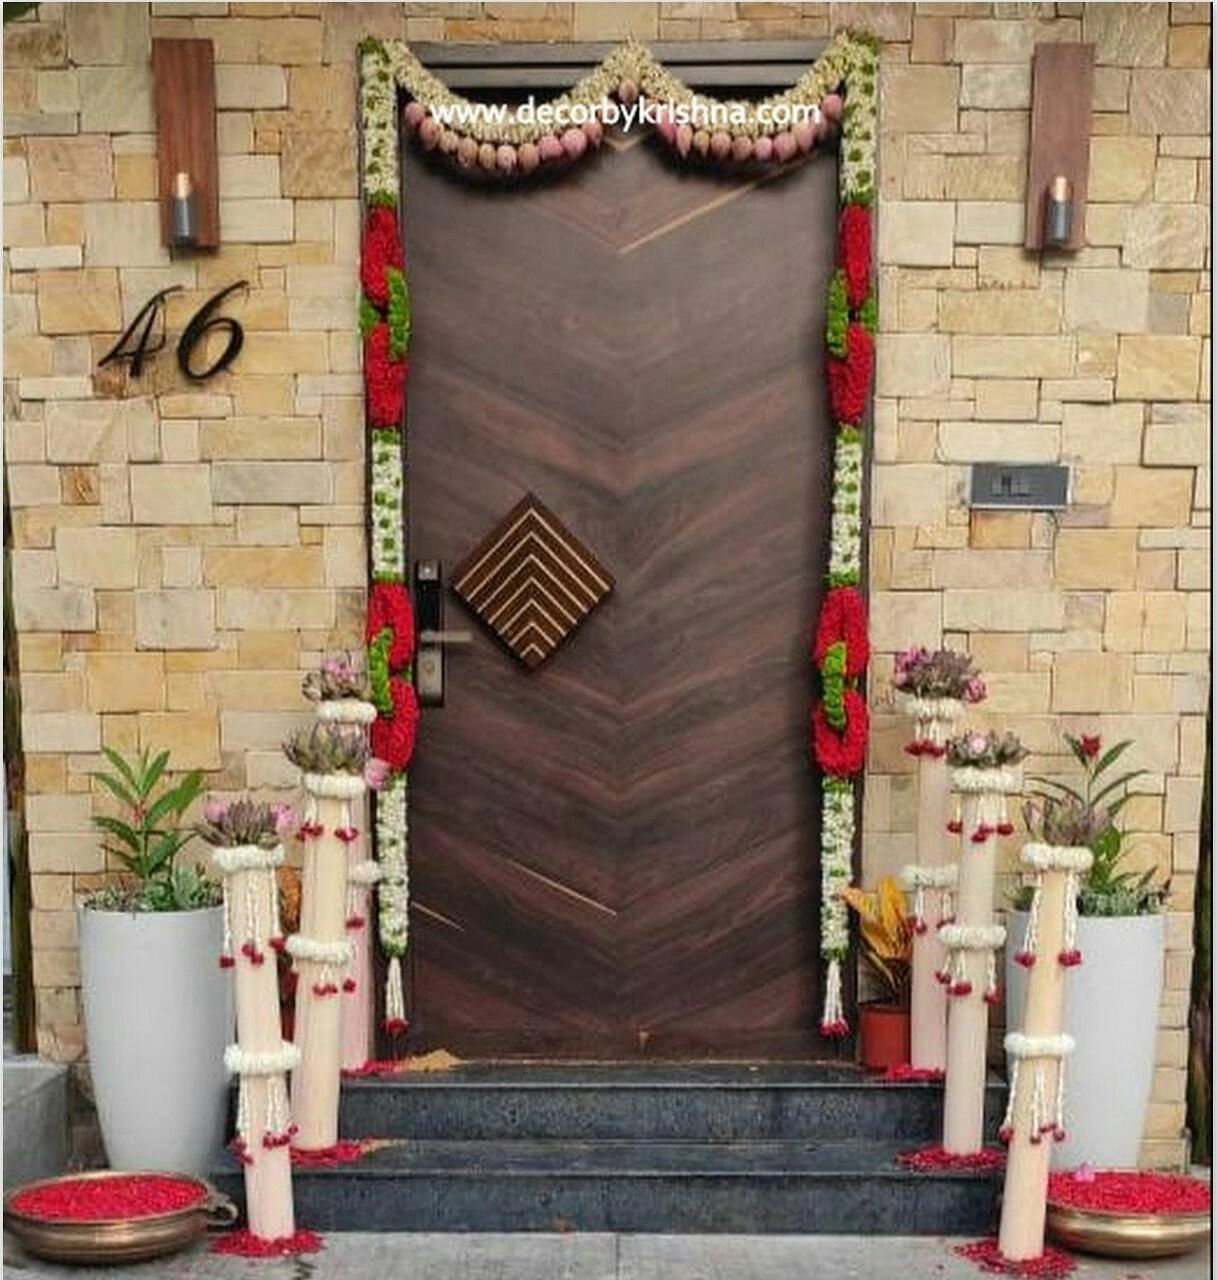 Lasting first impressions - Trends in Main door entrance decor.